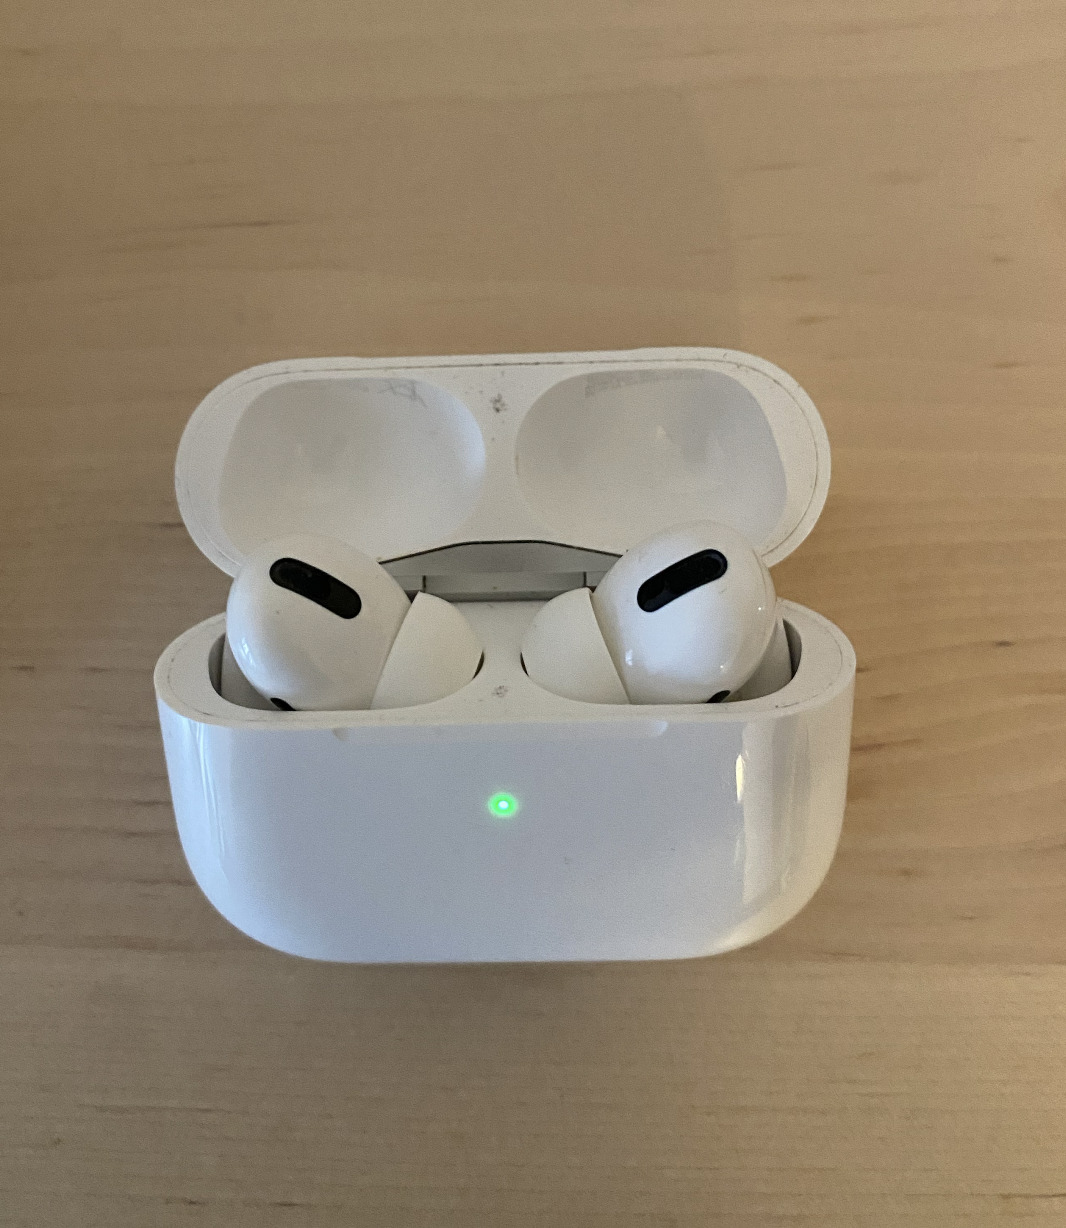 AirPods Pro 1ere generation